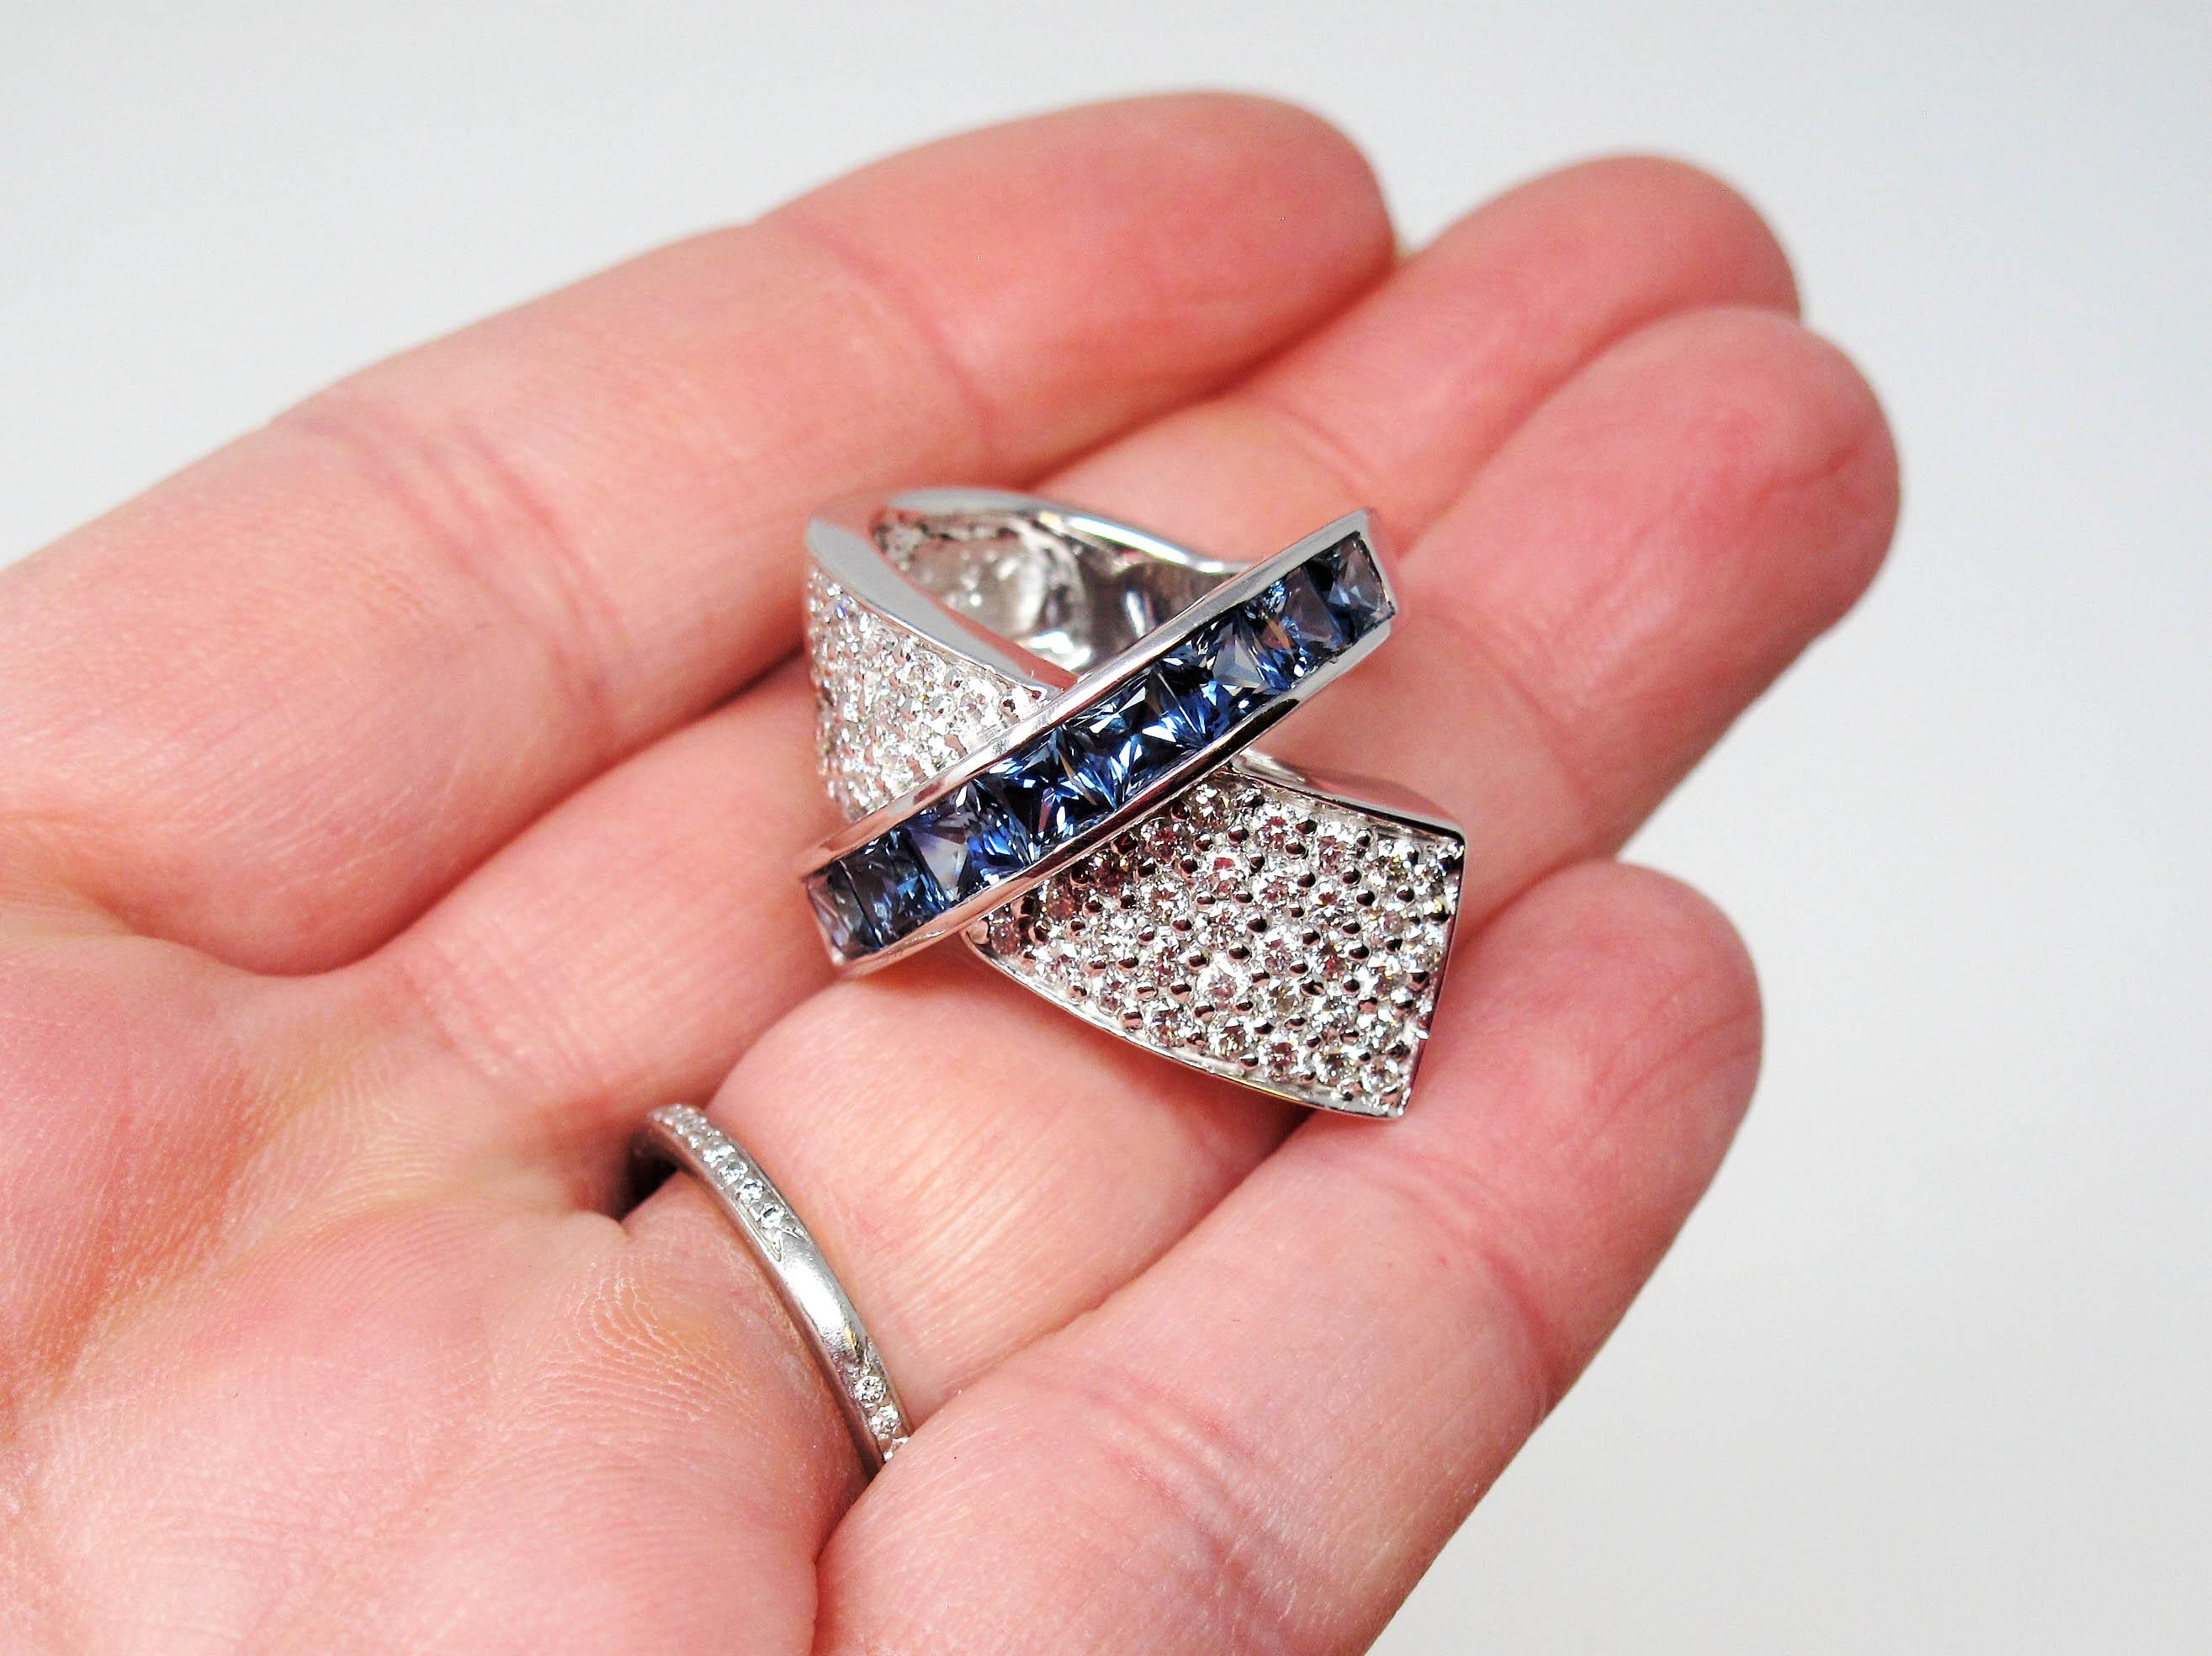 Ring size: 5

This stunning diamond and sapphire ring absolutely exudes modern sophistication This ultra  contemporary piece glitters from all directions with its sparkling pave diamonds, while the brilliant blue sapphires add a gorgeous pop of